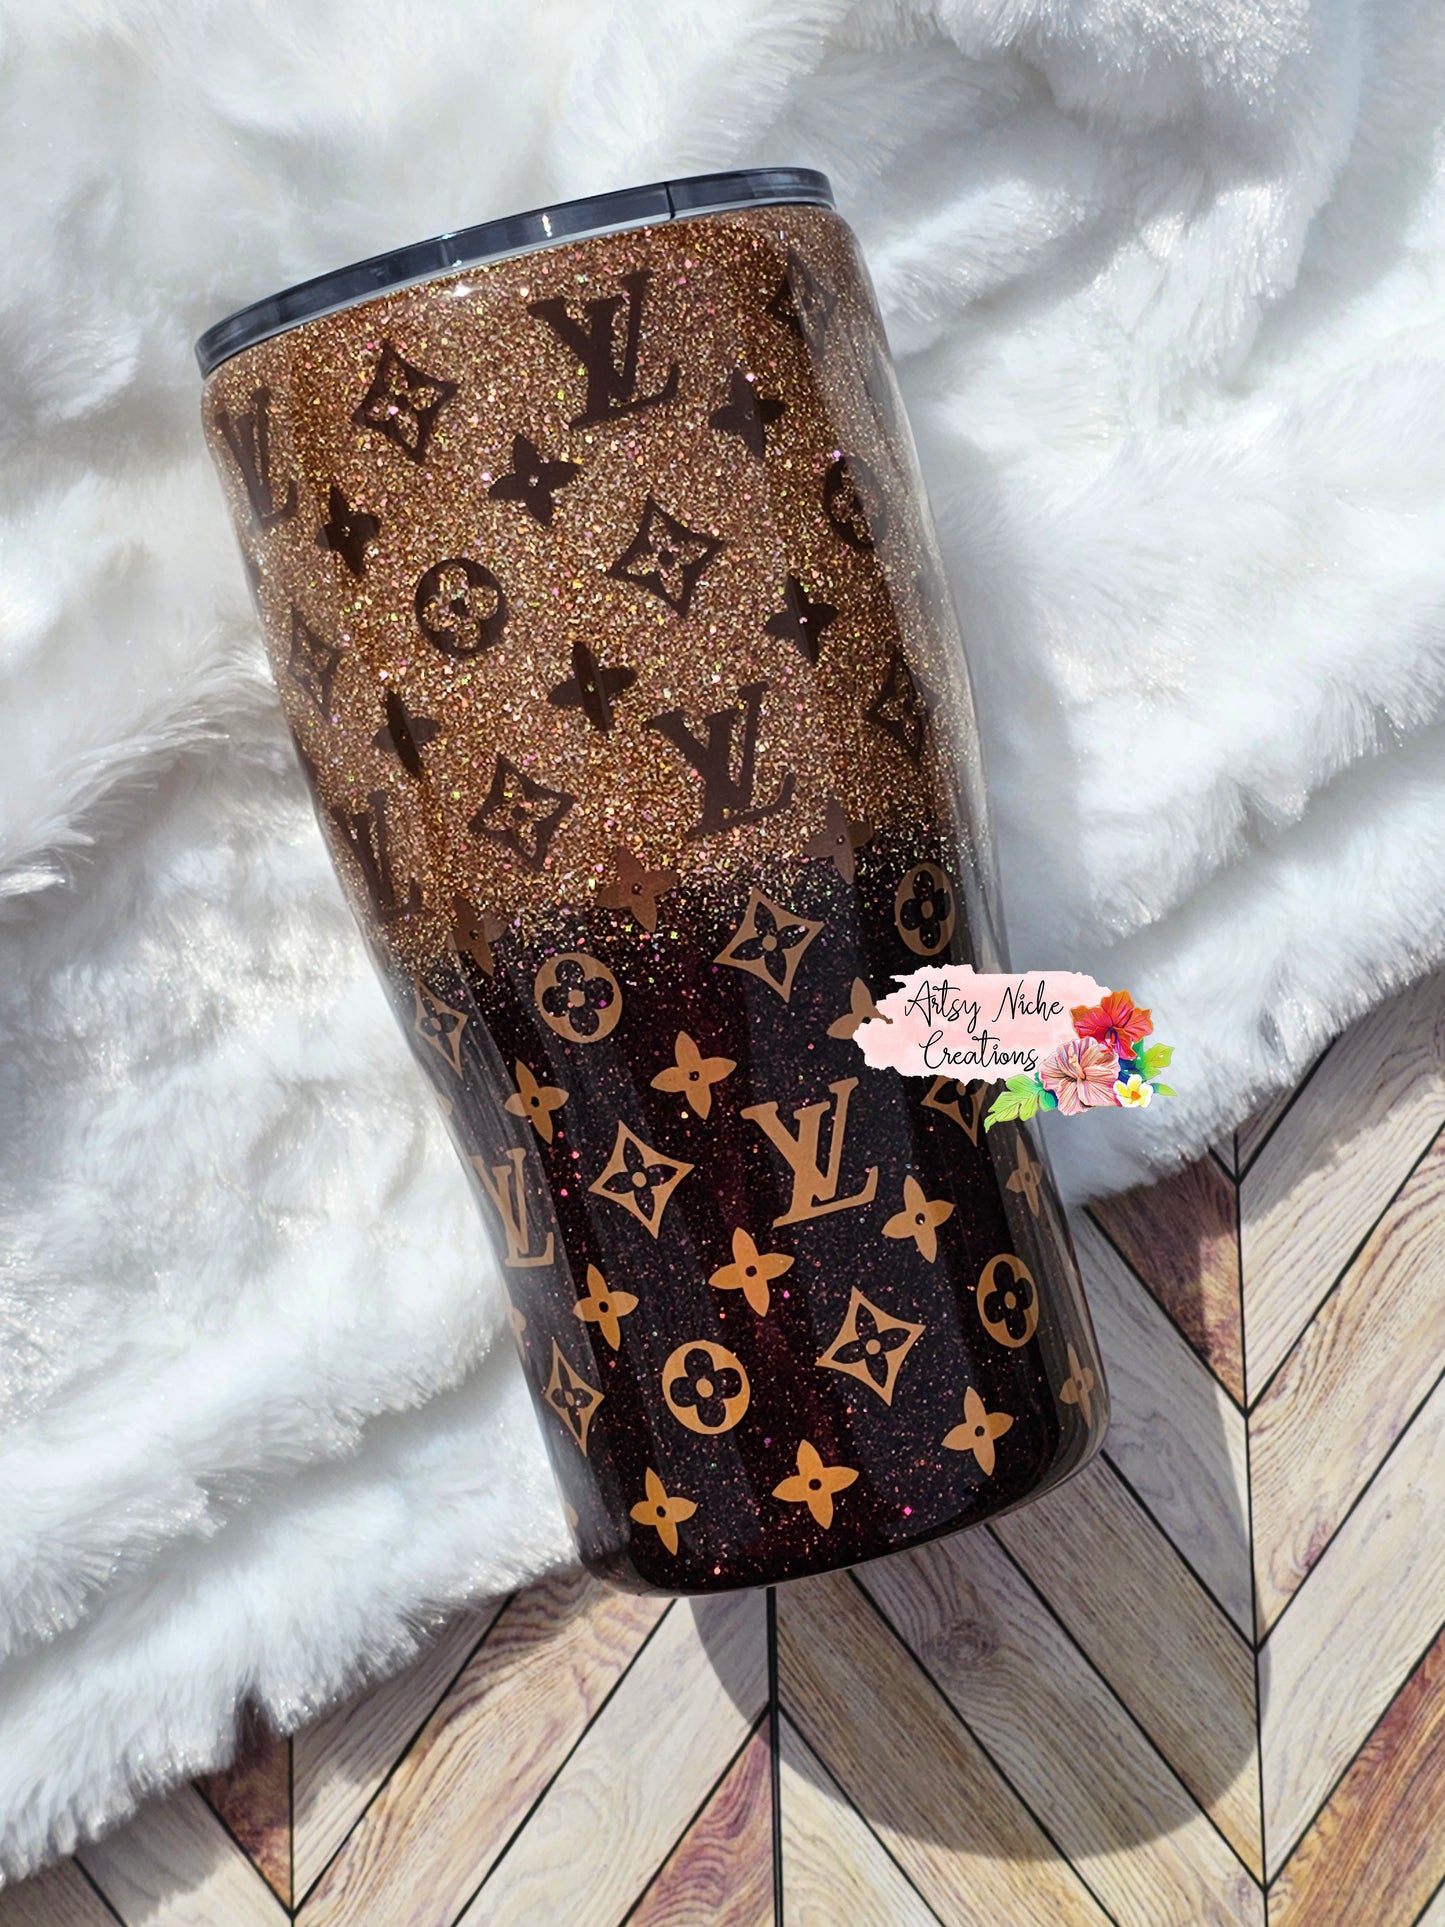 Louis Vuitton Decals For Tumblers